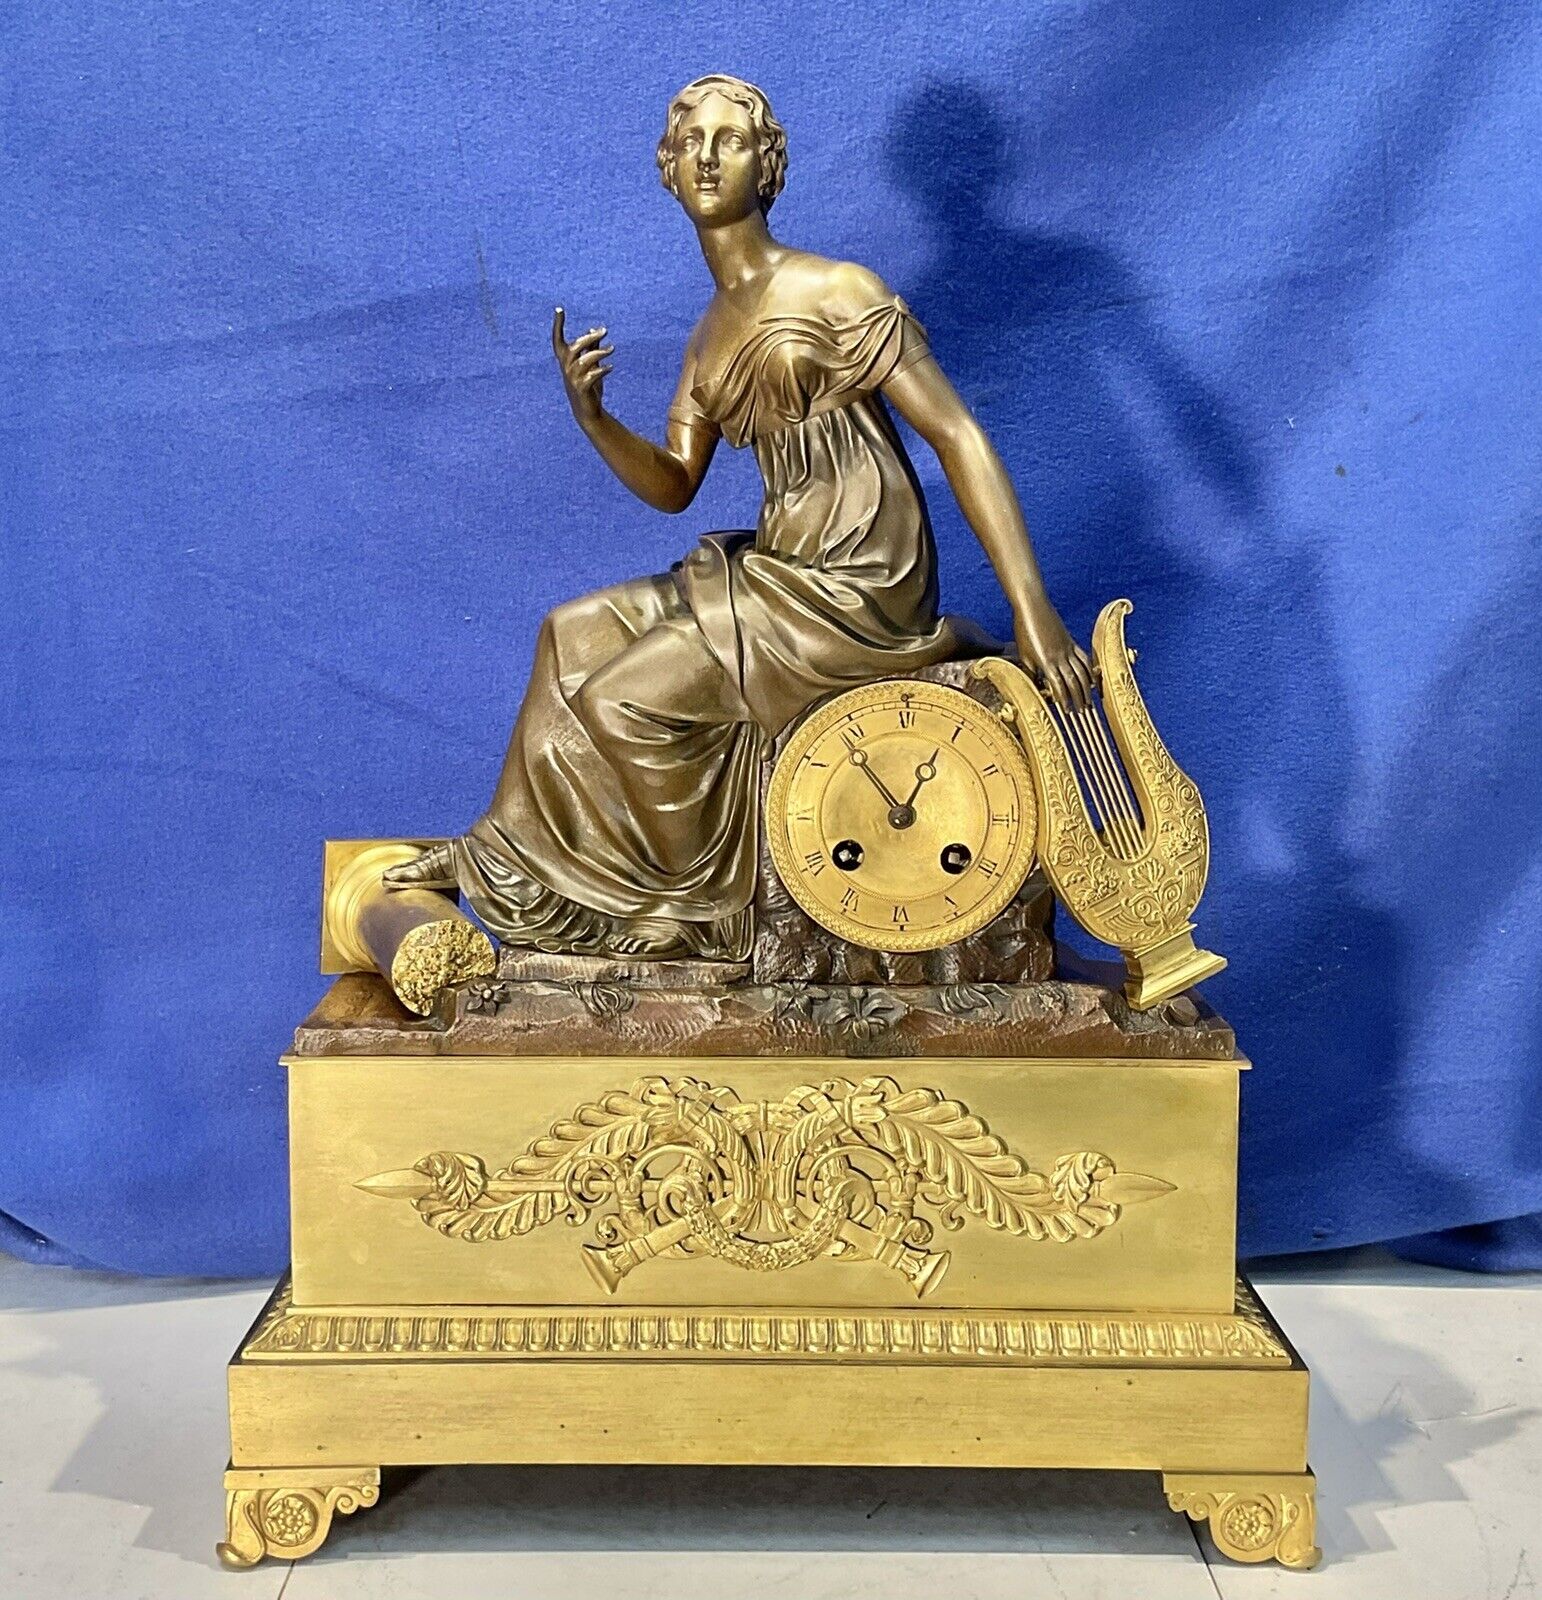 1825 ANTIQUE FRENCH JAPY FRERES STRIKES KEY WOUND,GILT BRONZE FIGURAL CLOCK